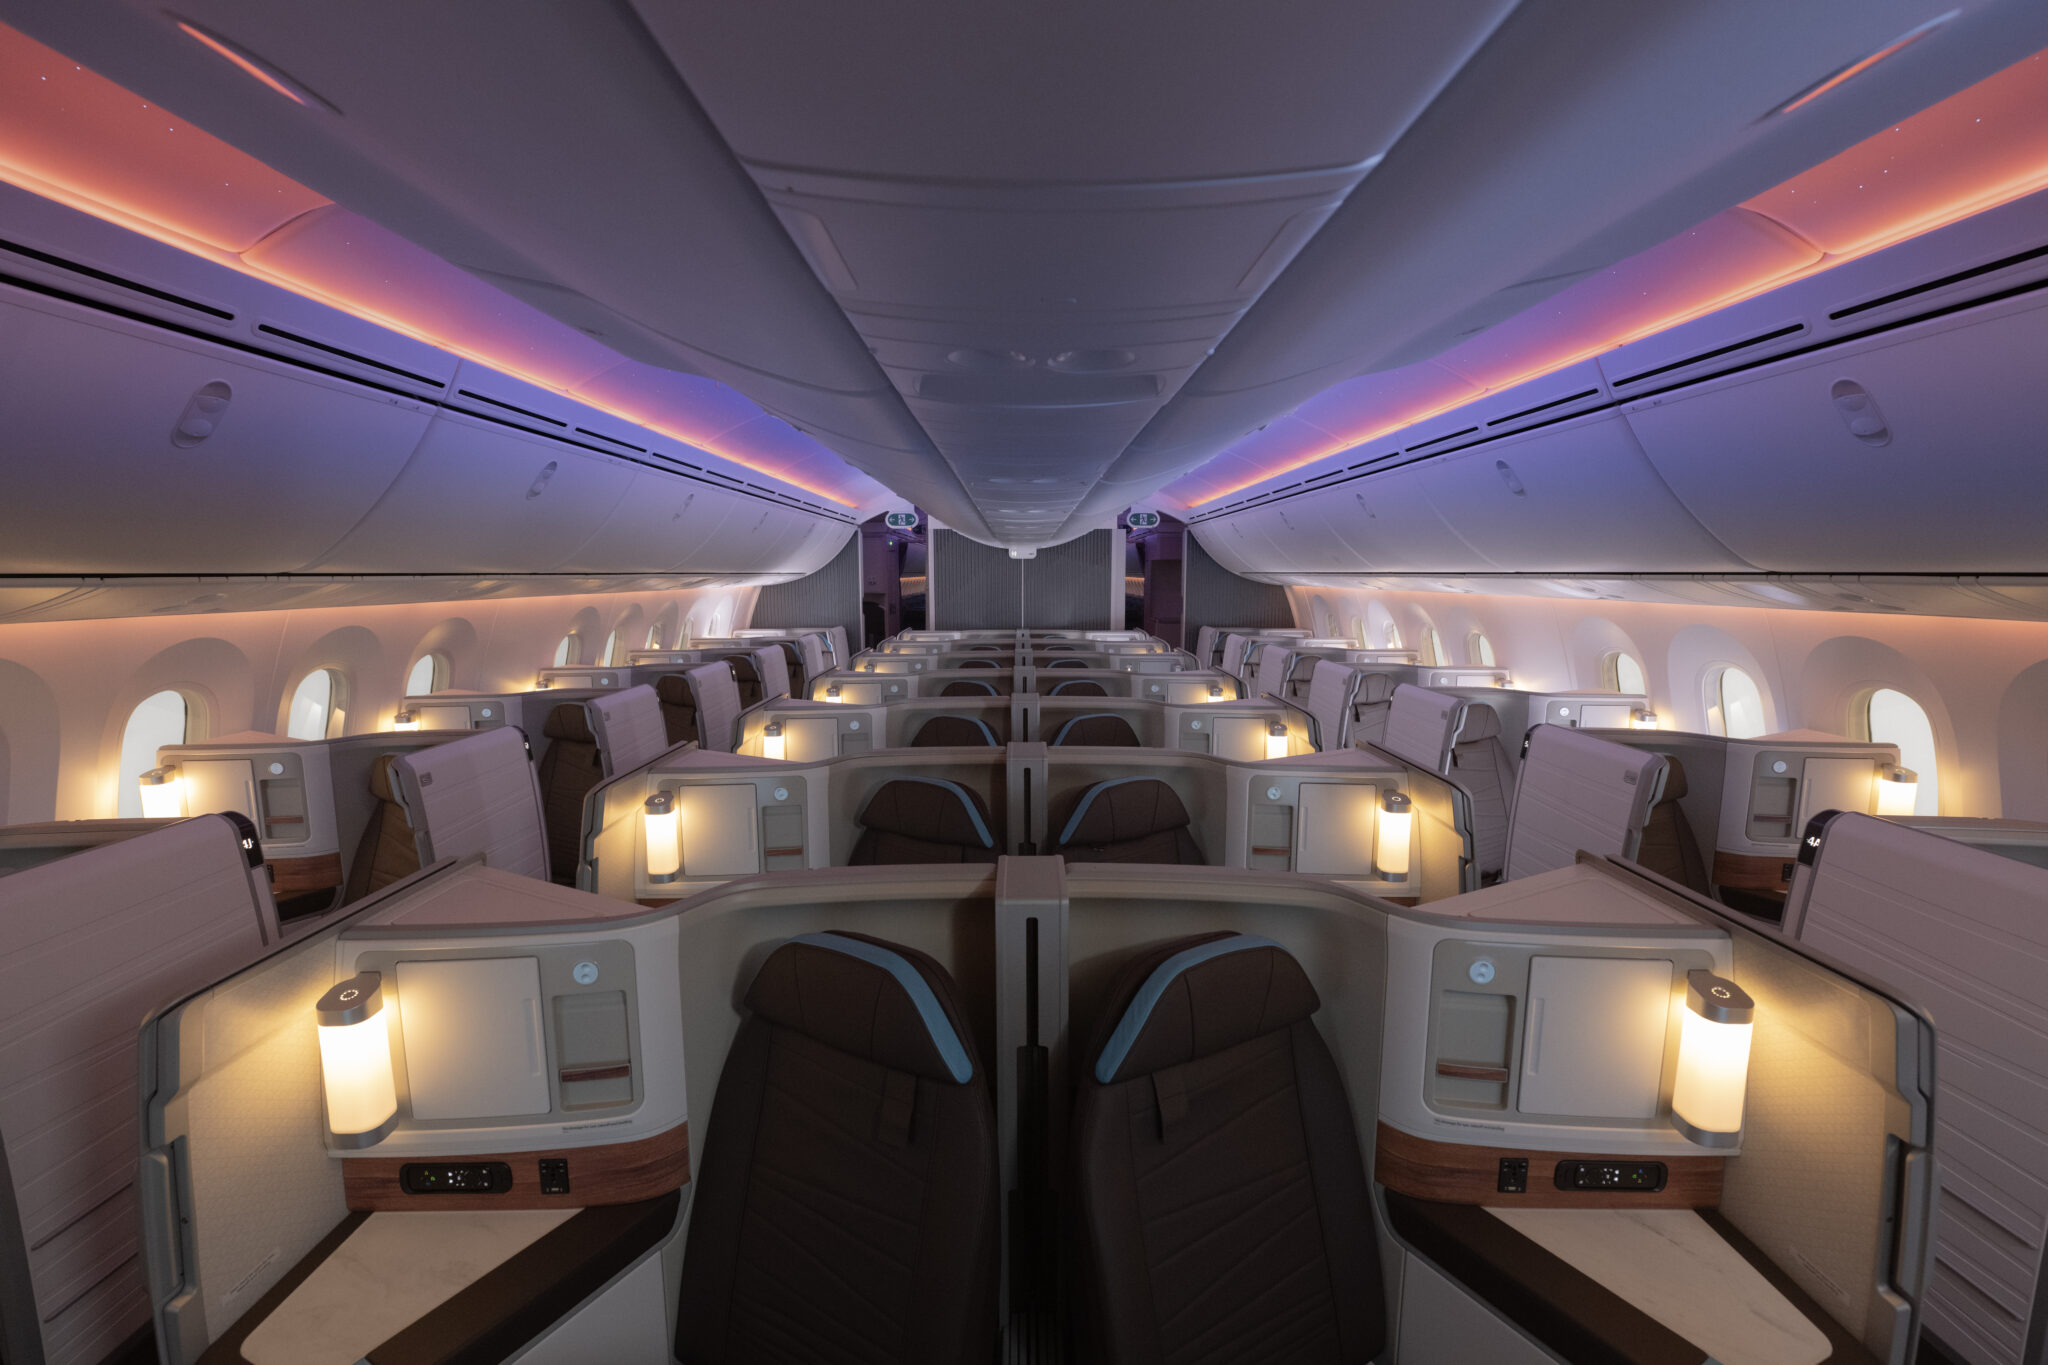 An image of the layout of a Boeing 787-9. Source: Hawaiian Airlines